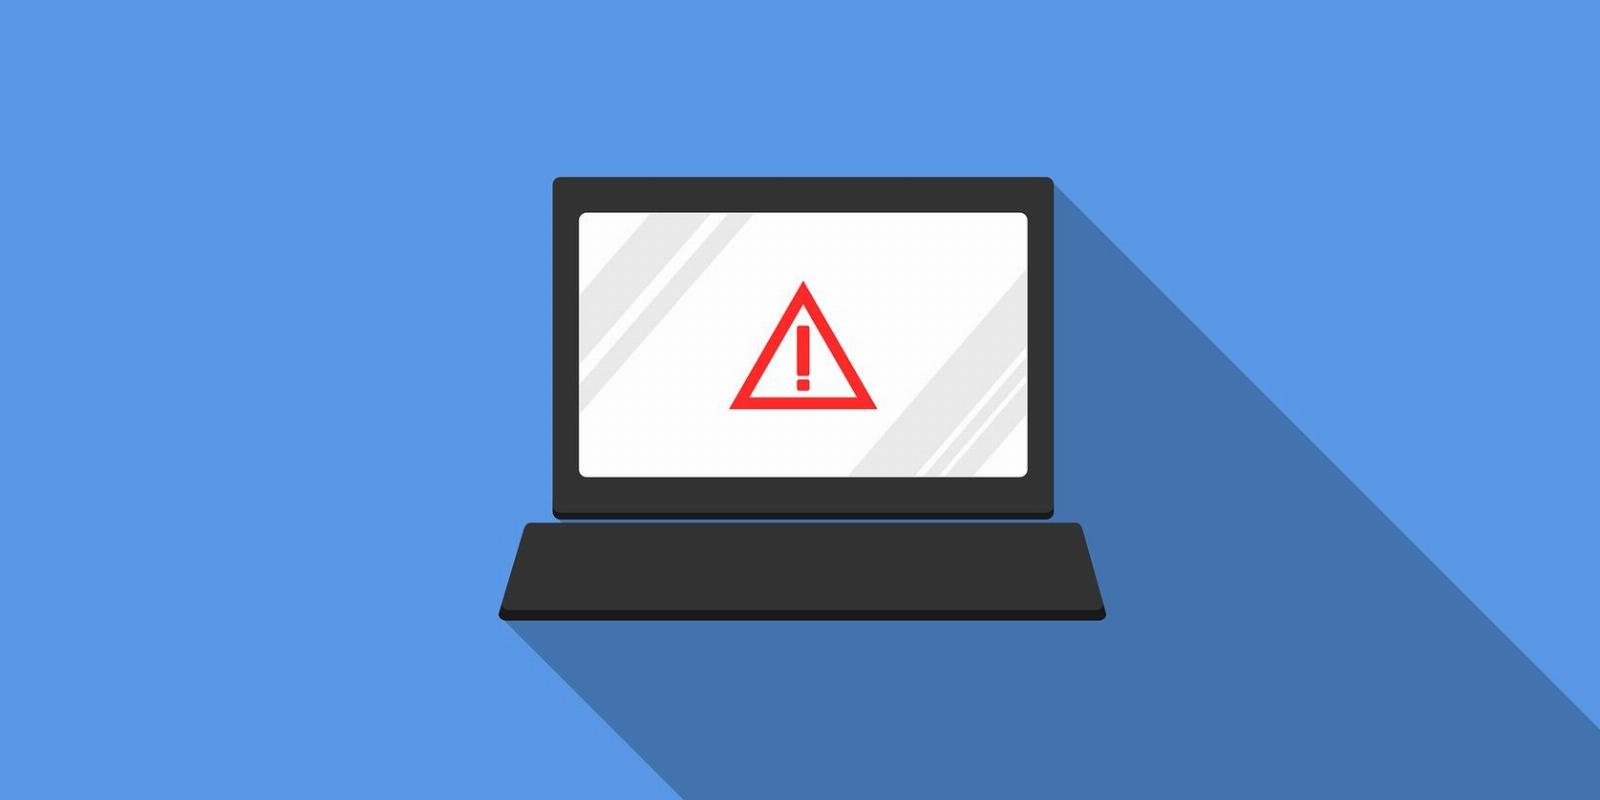 What Is a Remote Desktop Protocol Attack and How Can You Prevent It?